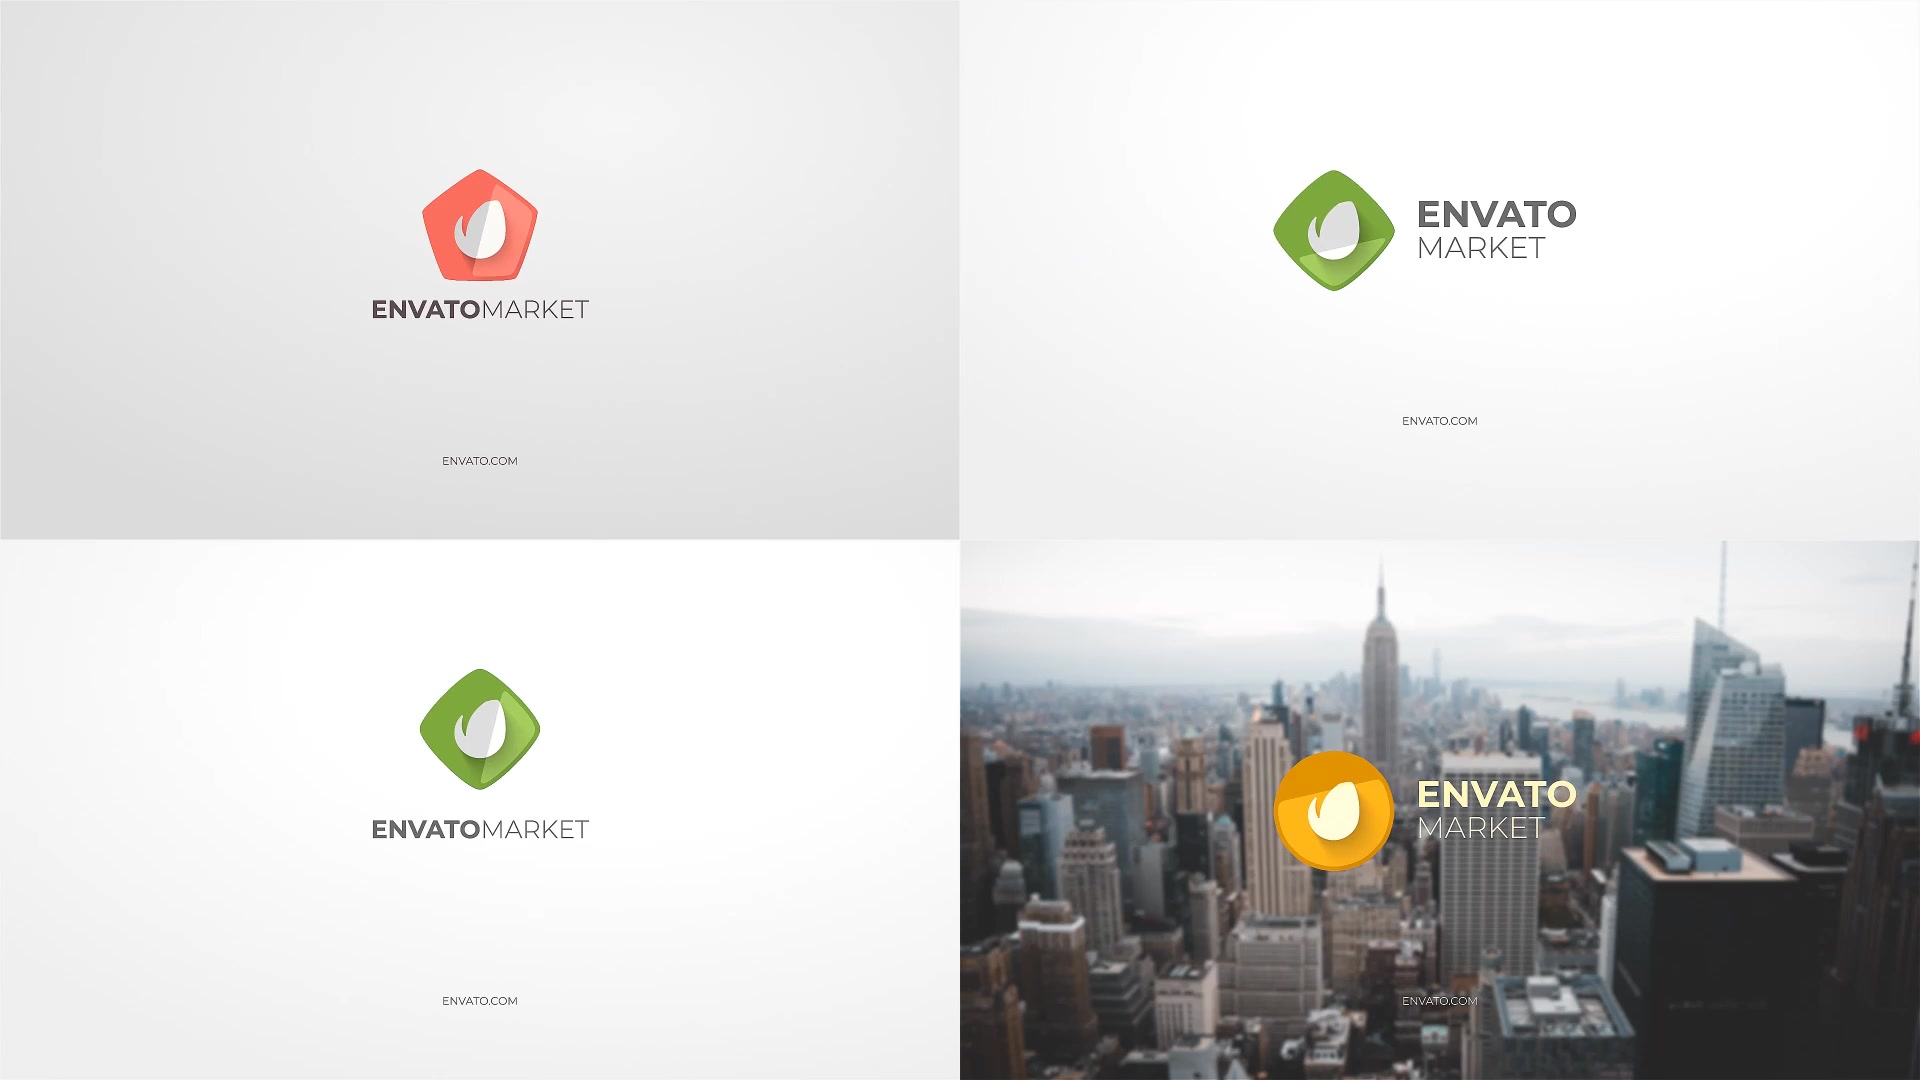 Flat Logo Reveal Pack - Download Videohive 21170907